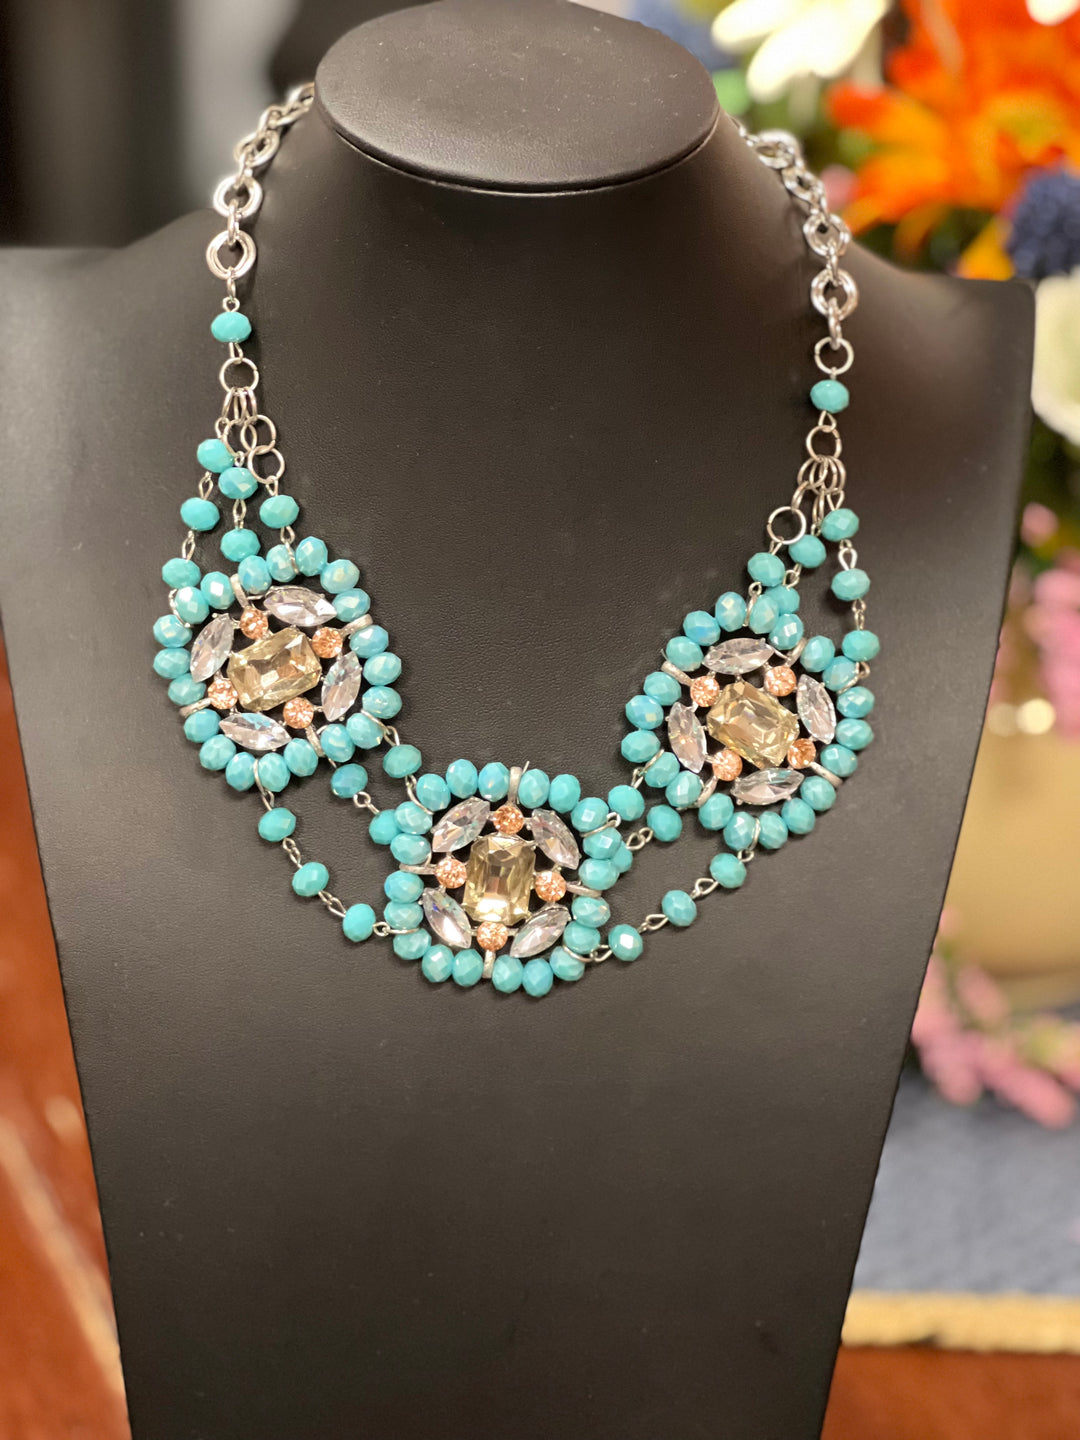 Bold Turquoise beads Center with Large Crystals Necklace